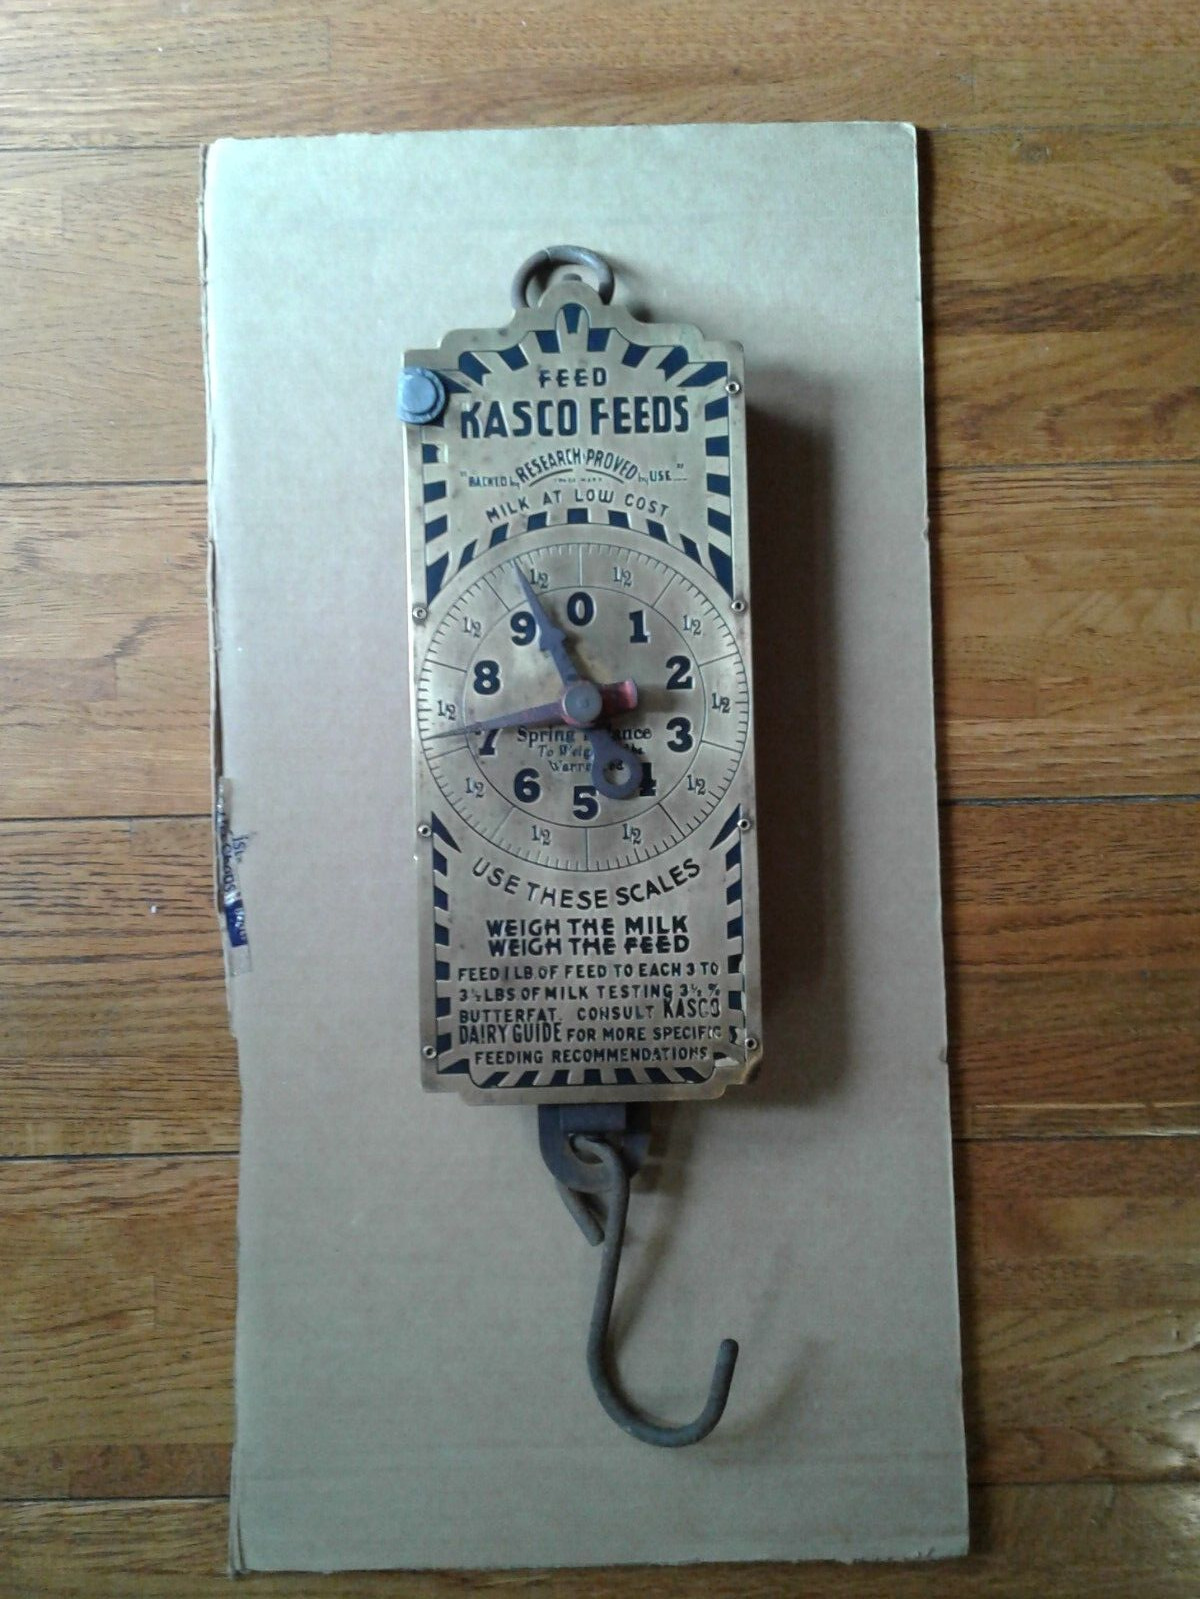 Vintage Kasco Feed 30-lb. spring-loaded scale.